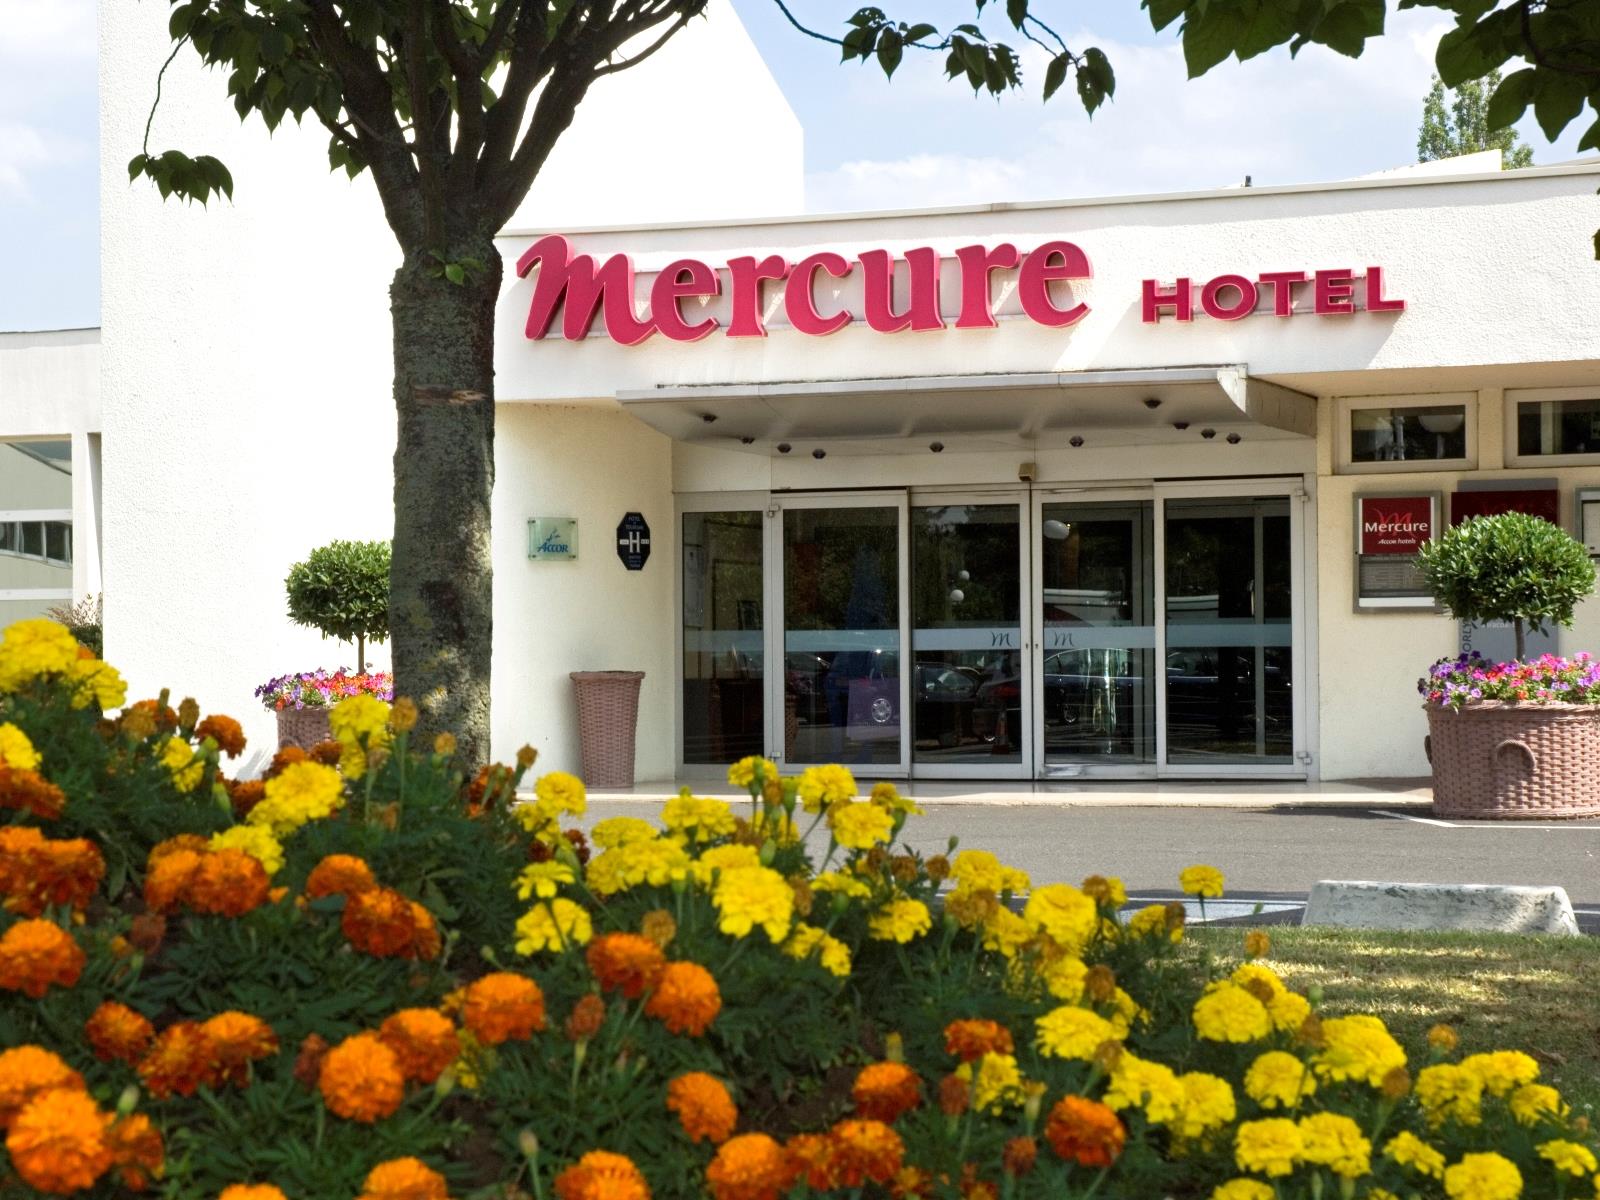 Mercure Orly Aeroport Hotel France FAQ 2016, What facilities are there in Mercure Orly Aeroport Hotel France 2016, What Languages Spoken are Supported in Mercure Orly Aeroport Hotel France 2016, Which payment cards are accepted in Mercure Orly Aeroport Hotel France , France Mercure Orly Aeroport Hotel room facilities and services Q&A 2016, France Mercure Orly Aeroport Hotel online booking services 2016, France Mercure Orly Aeroport Hotel address 2016, France Mercure Orly Aeroport Hotel telephone number 2016,France Mercure Orly Aeroport Hotel map 2016, France Mercure Orly Aeroport Hotel traffic guide 2016, how to go France Mercure Orly Aeroport Hotel, France Mercure Orly Aeroport Hotel booking online 2016, France Mercure Orly Aeroport Hotel room types 2016.